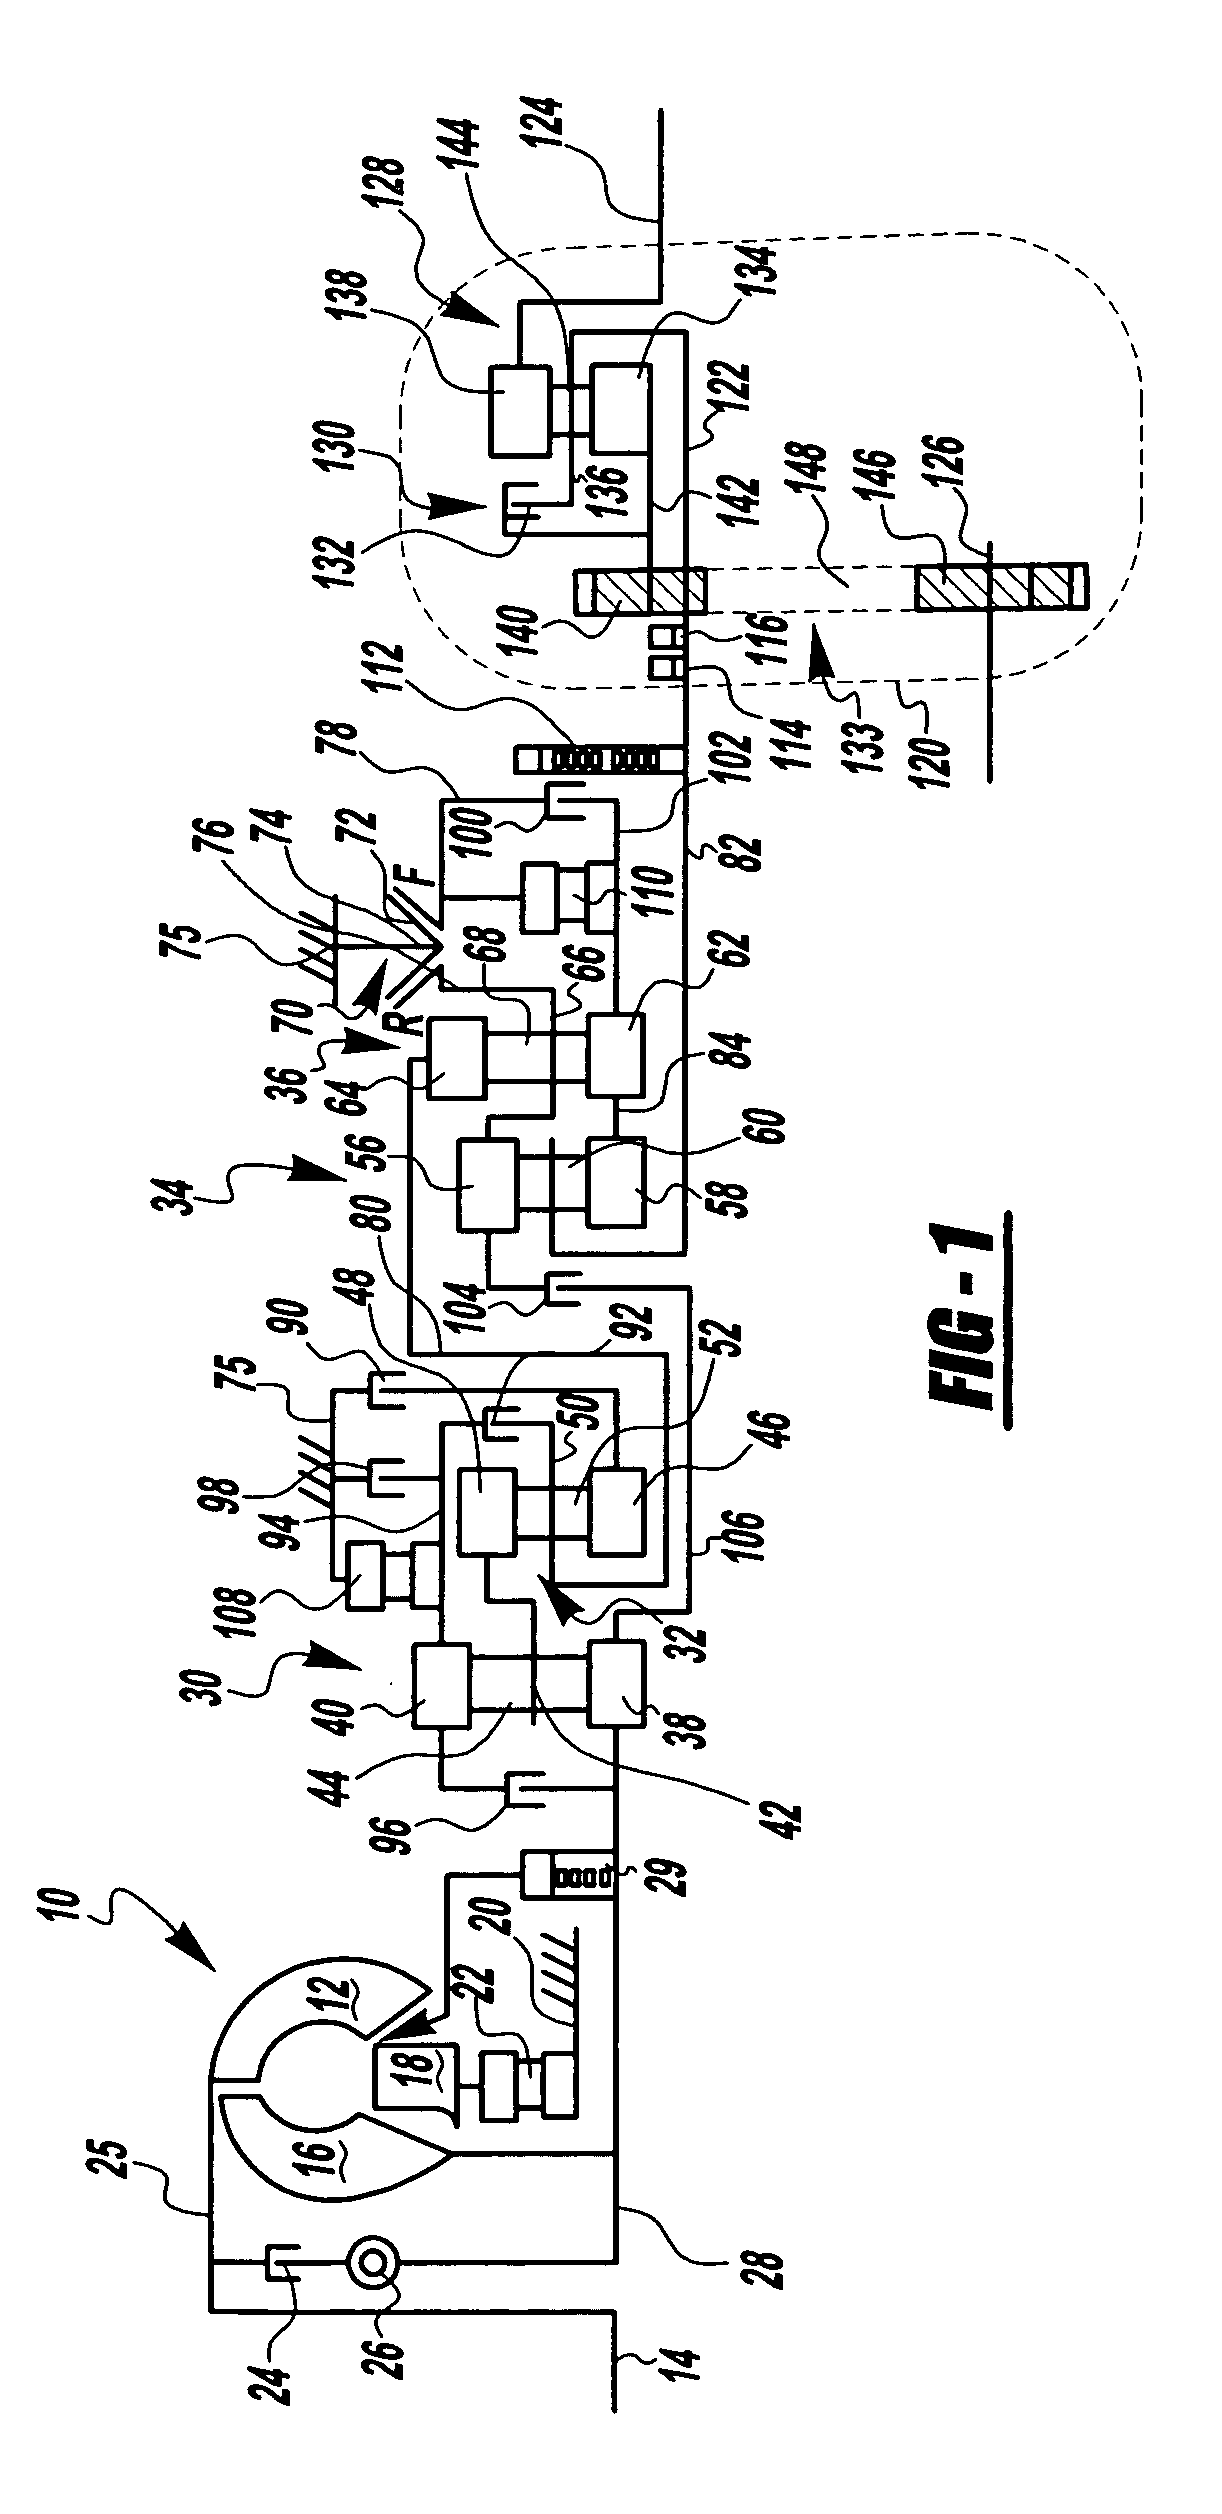 Multi-speed transmission and integrated drive transfer mechanism